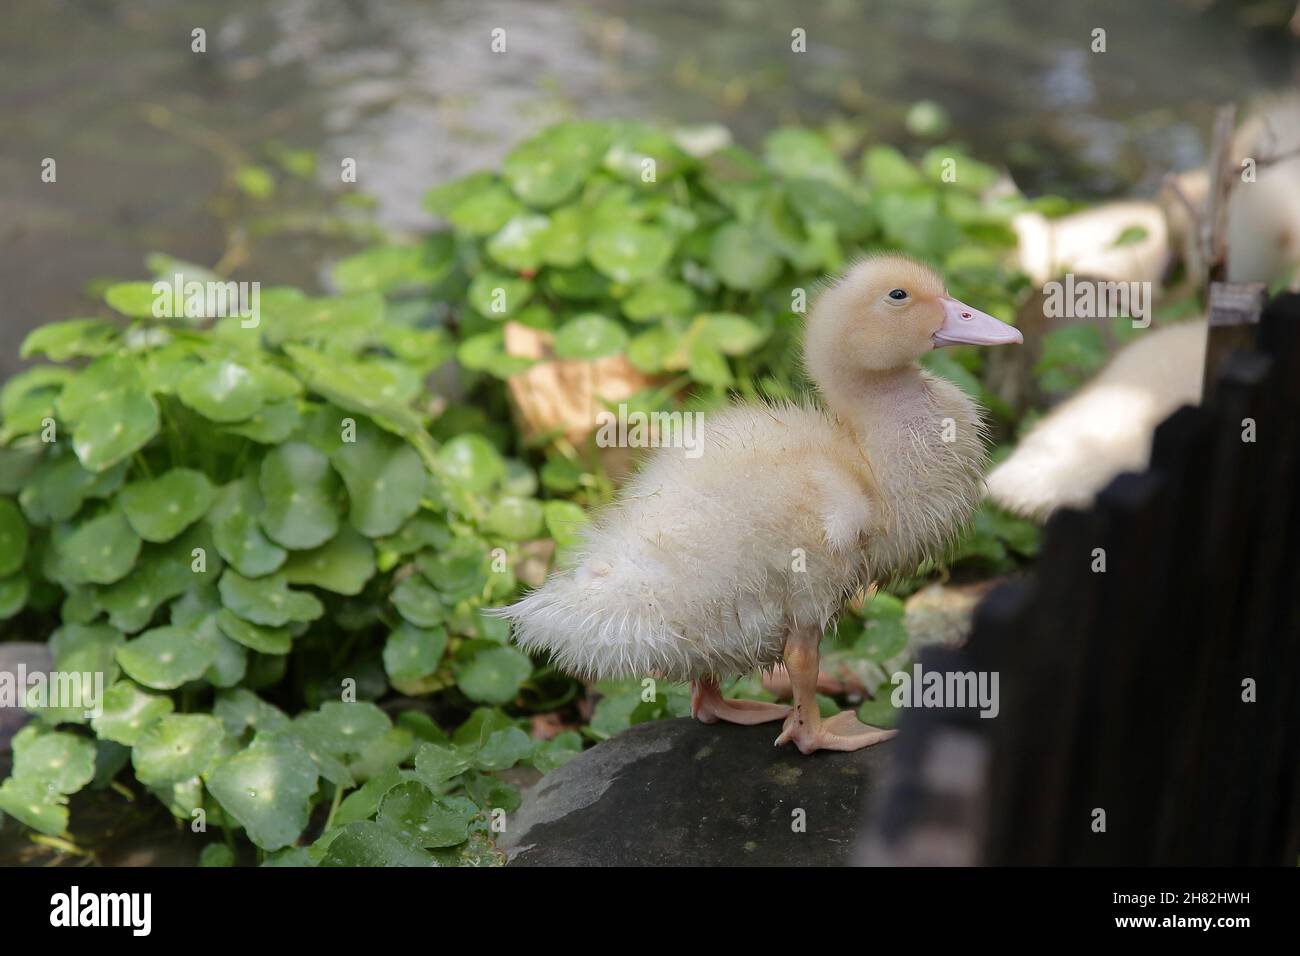 cute yellow duckling swimming in a pond with lots of fish Stock Photo